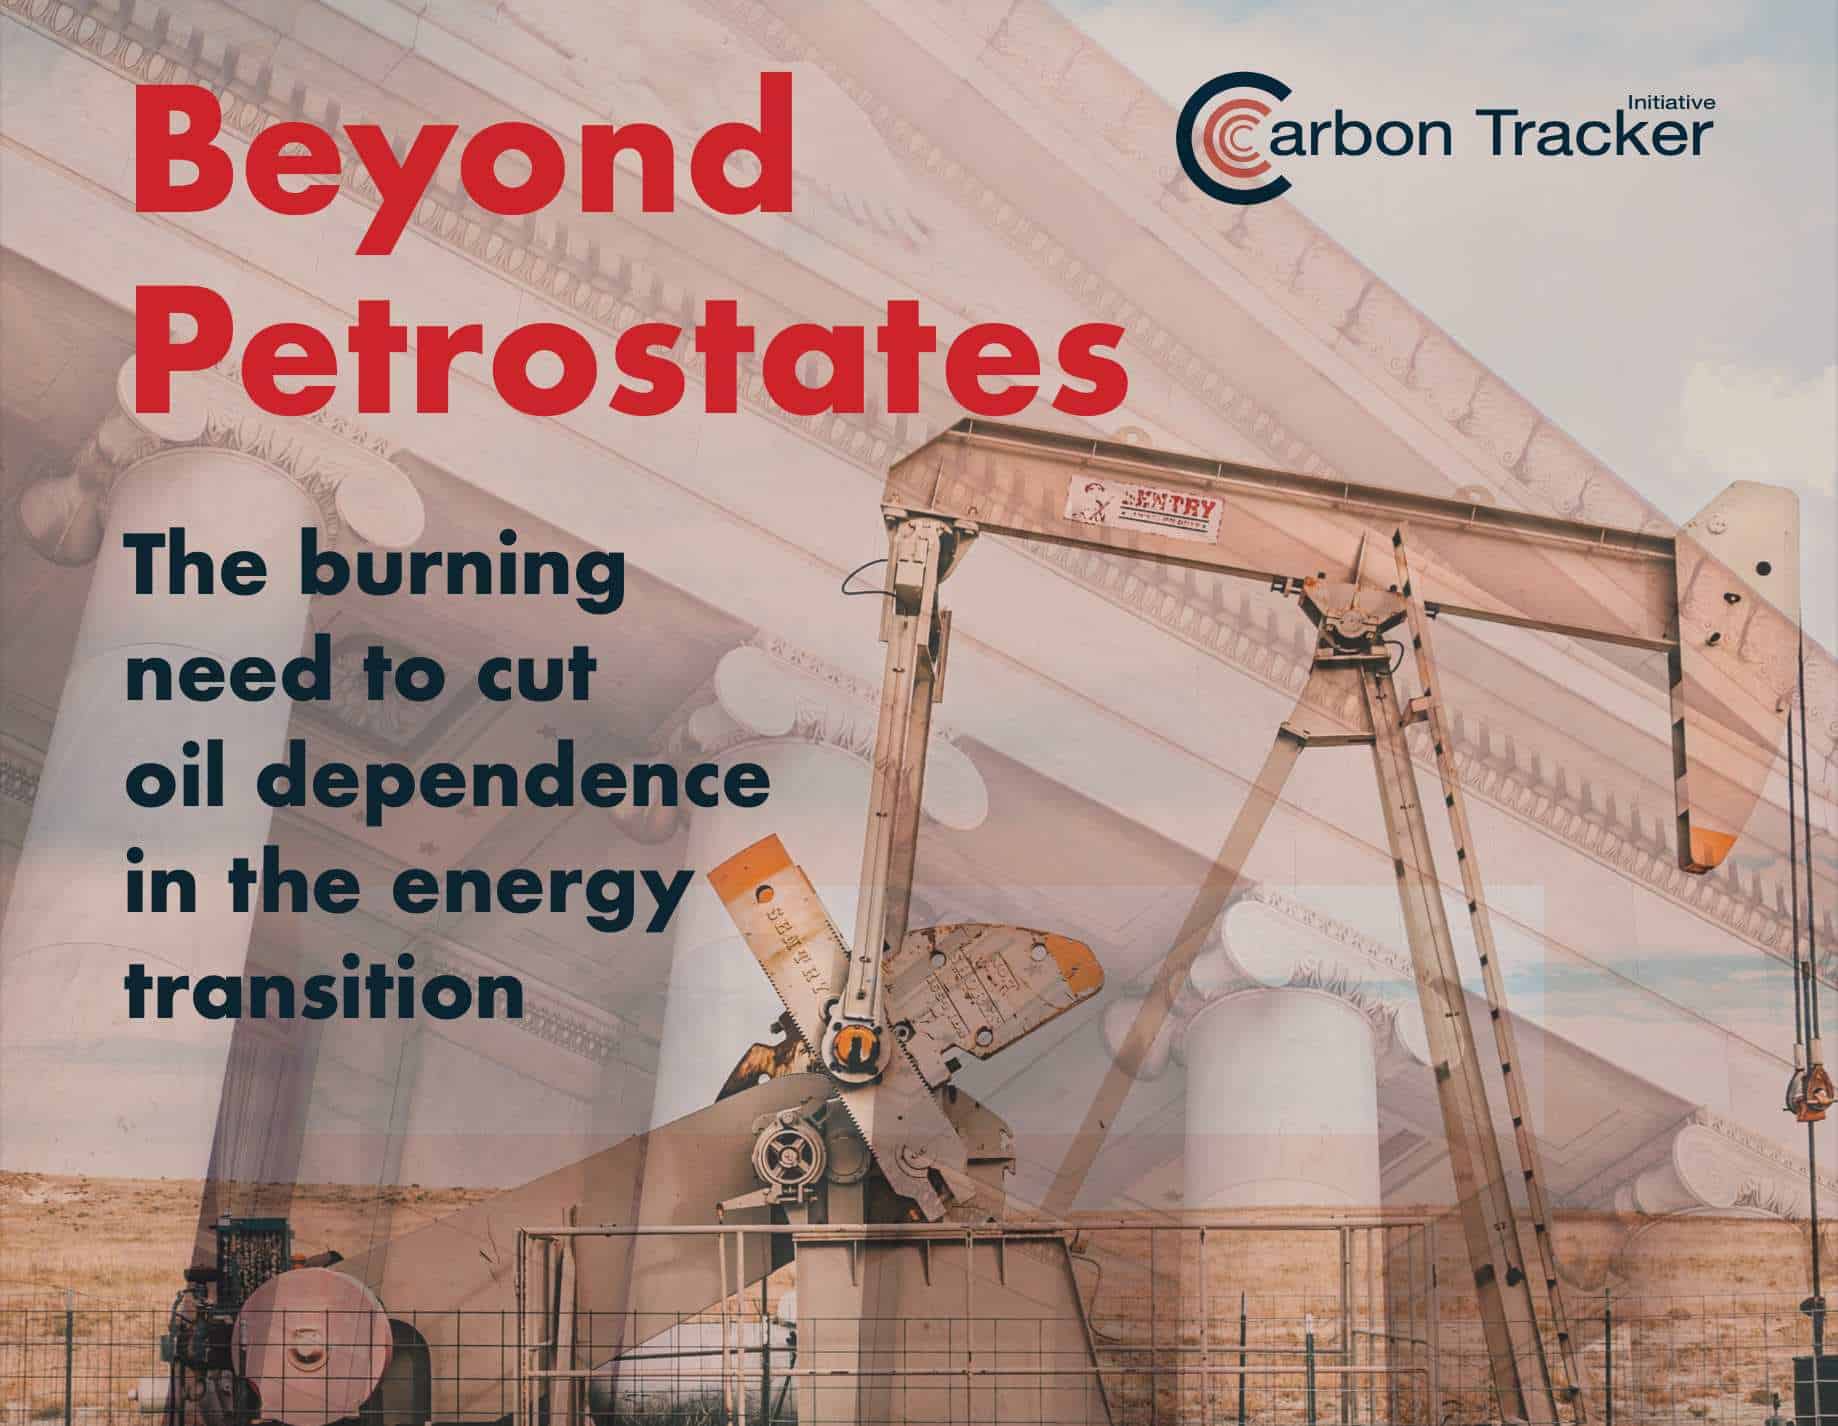 "Beyond petrostates: The burning need to cut oil dependence in the energy transition"